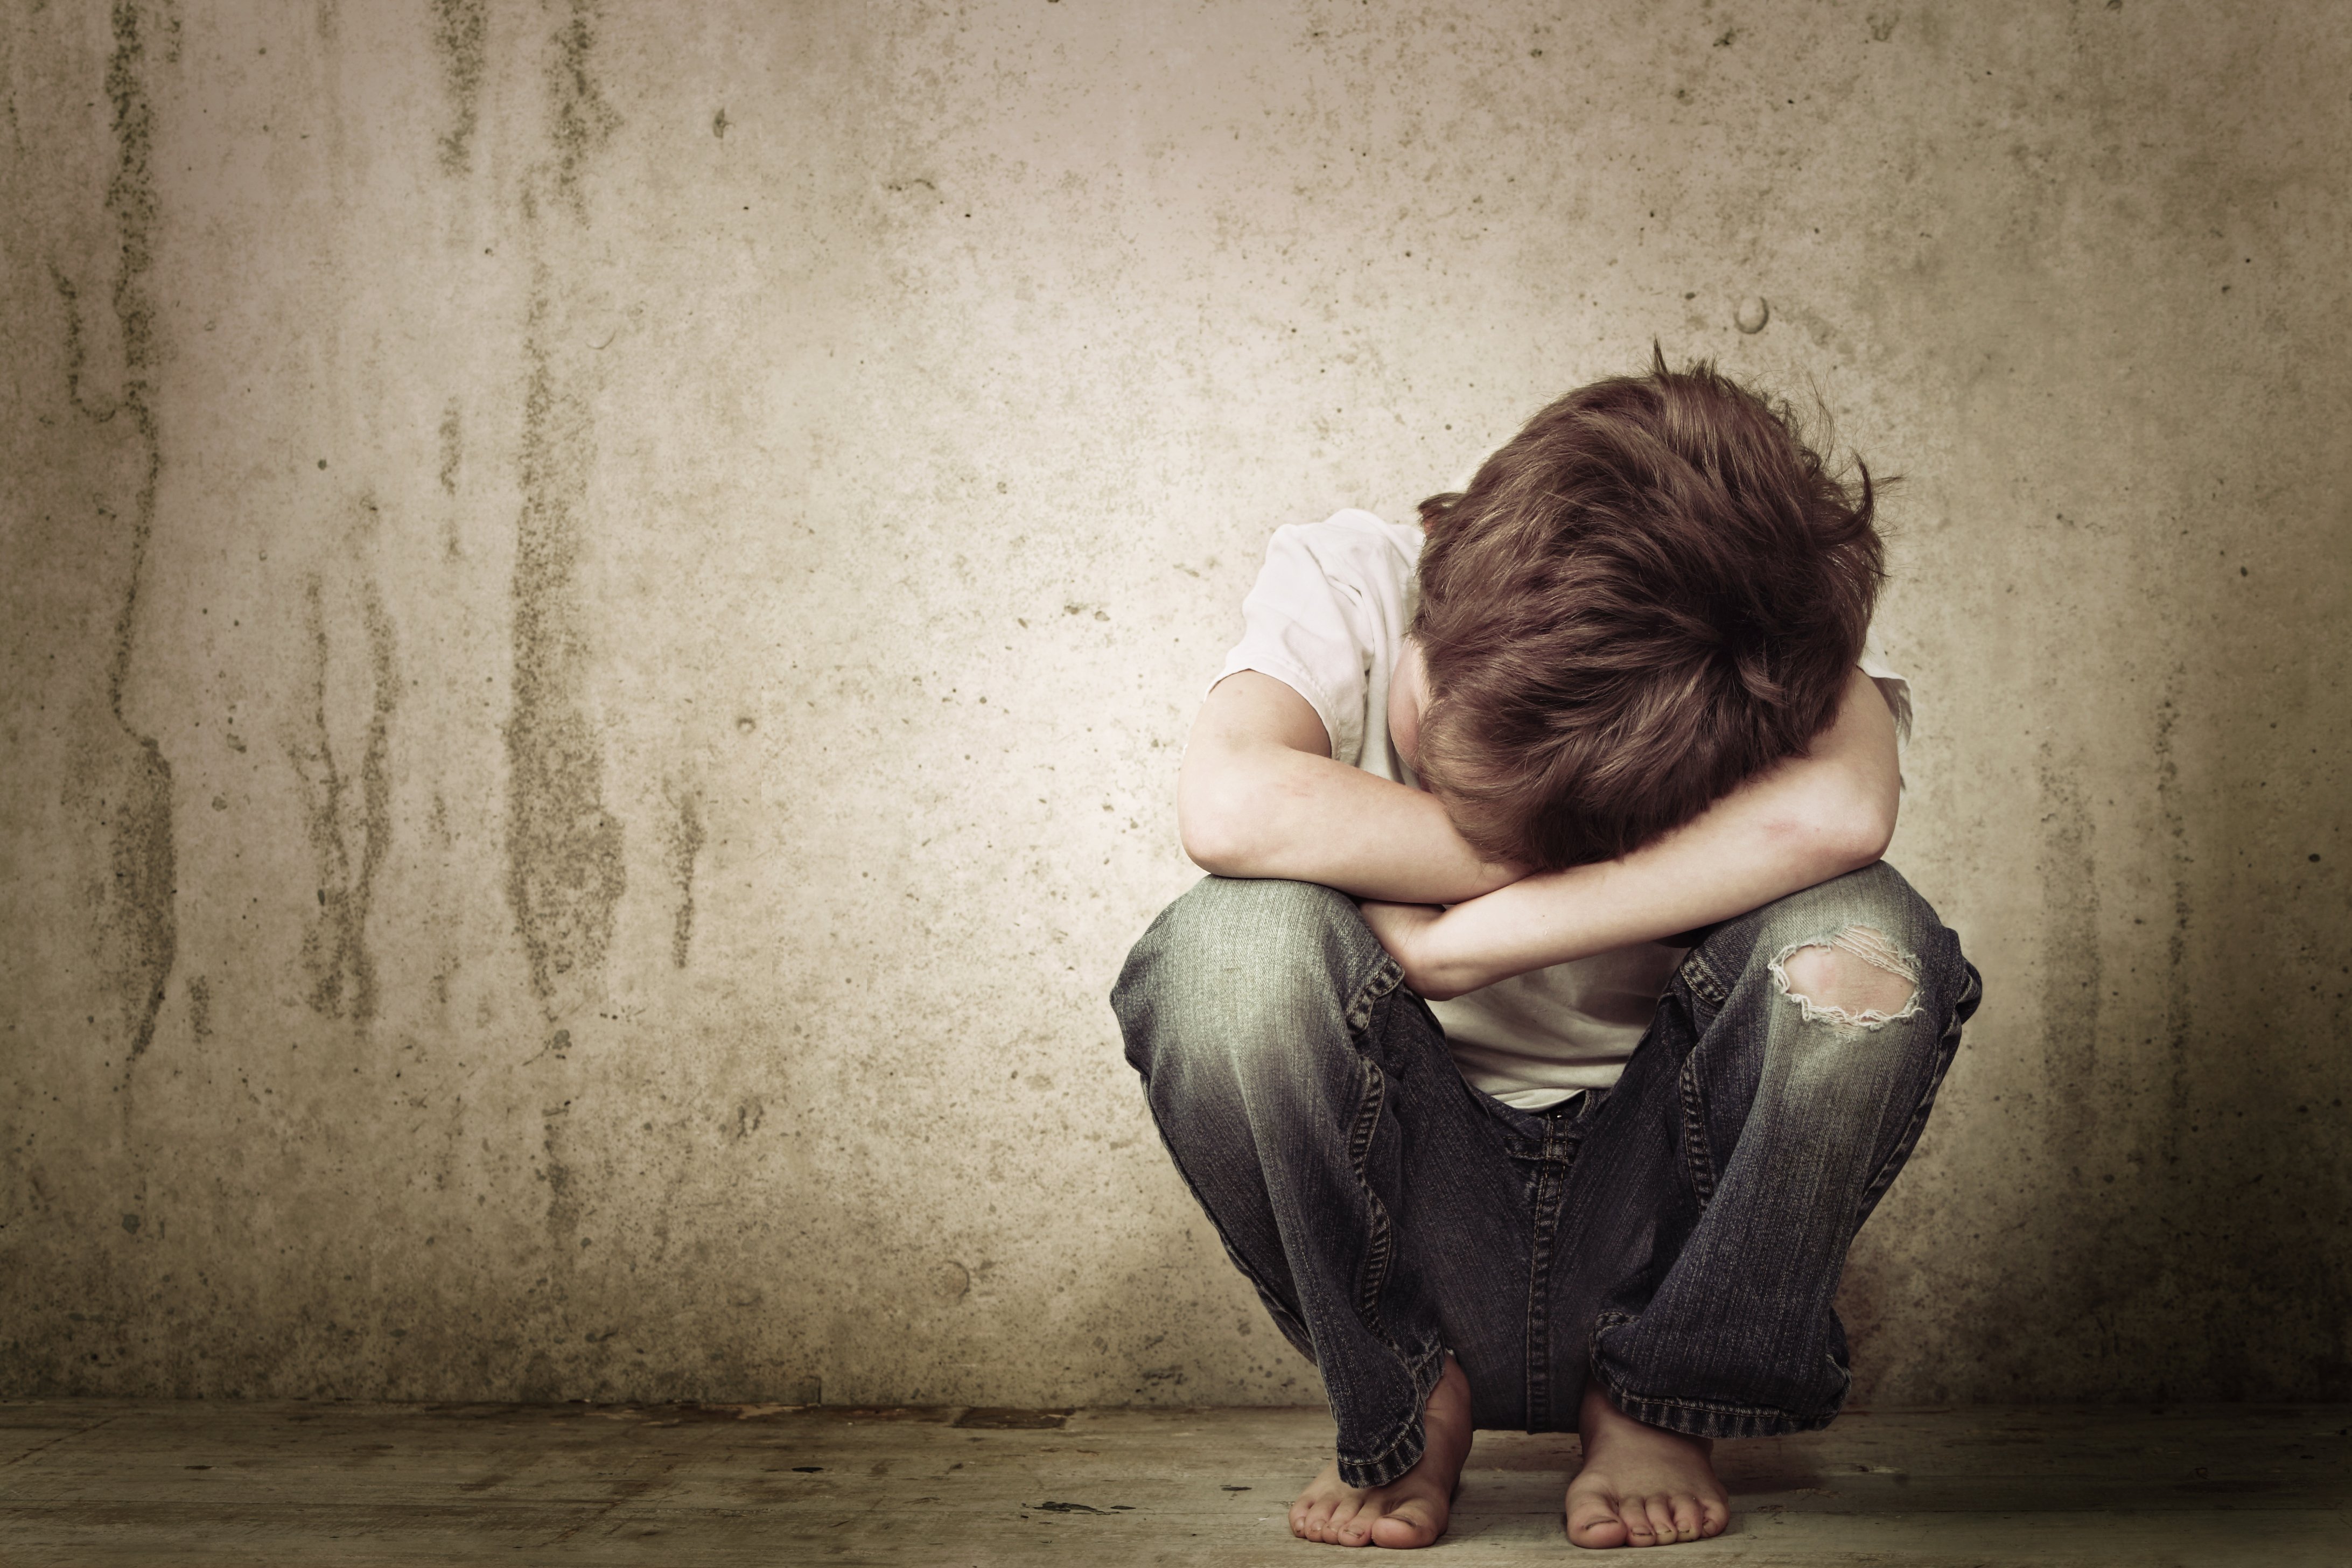 Sad boy crying in the corner. | Source: Shutterstock